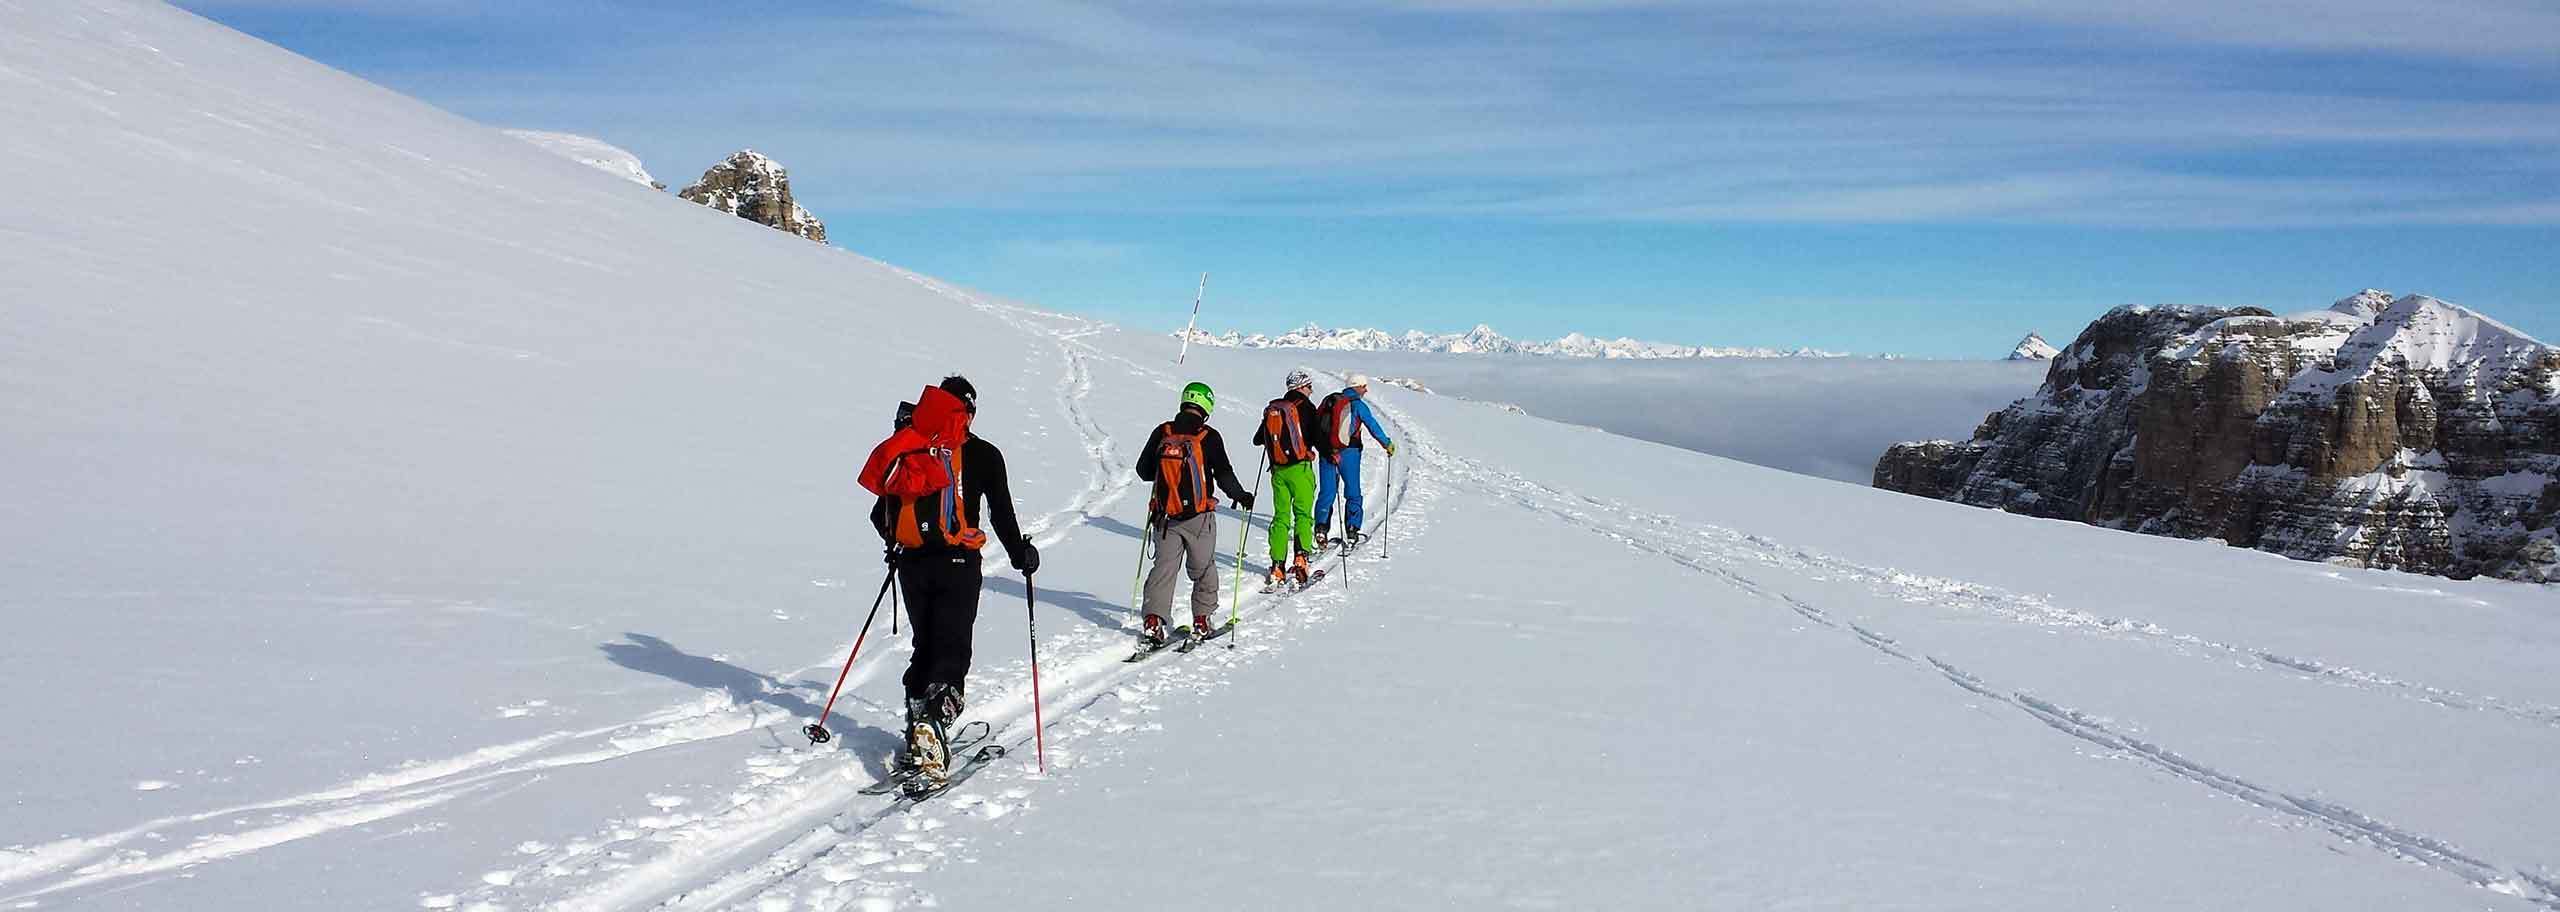 Ski Touring in Arabba with a Mountain Guide